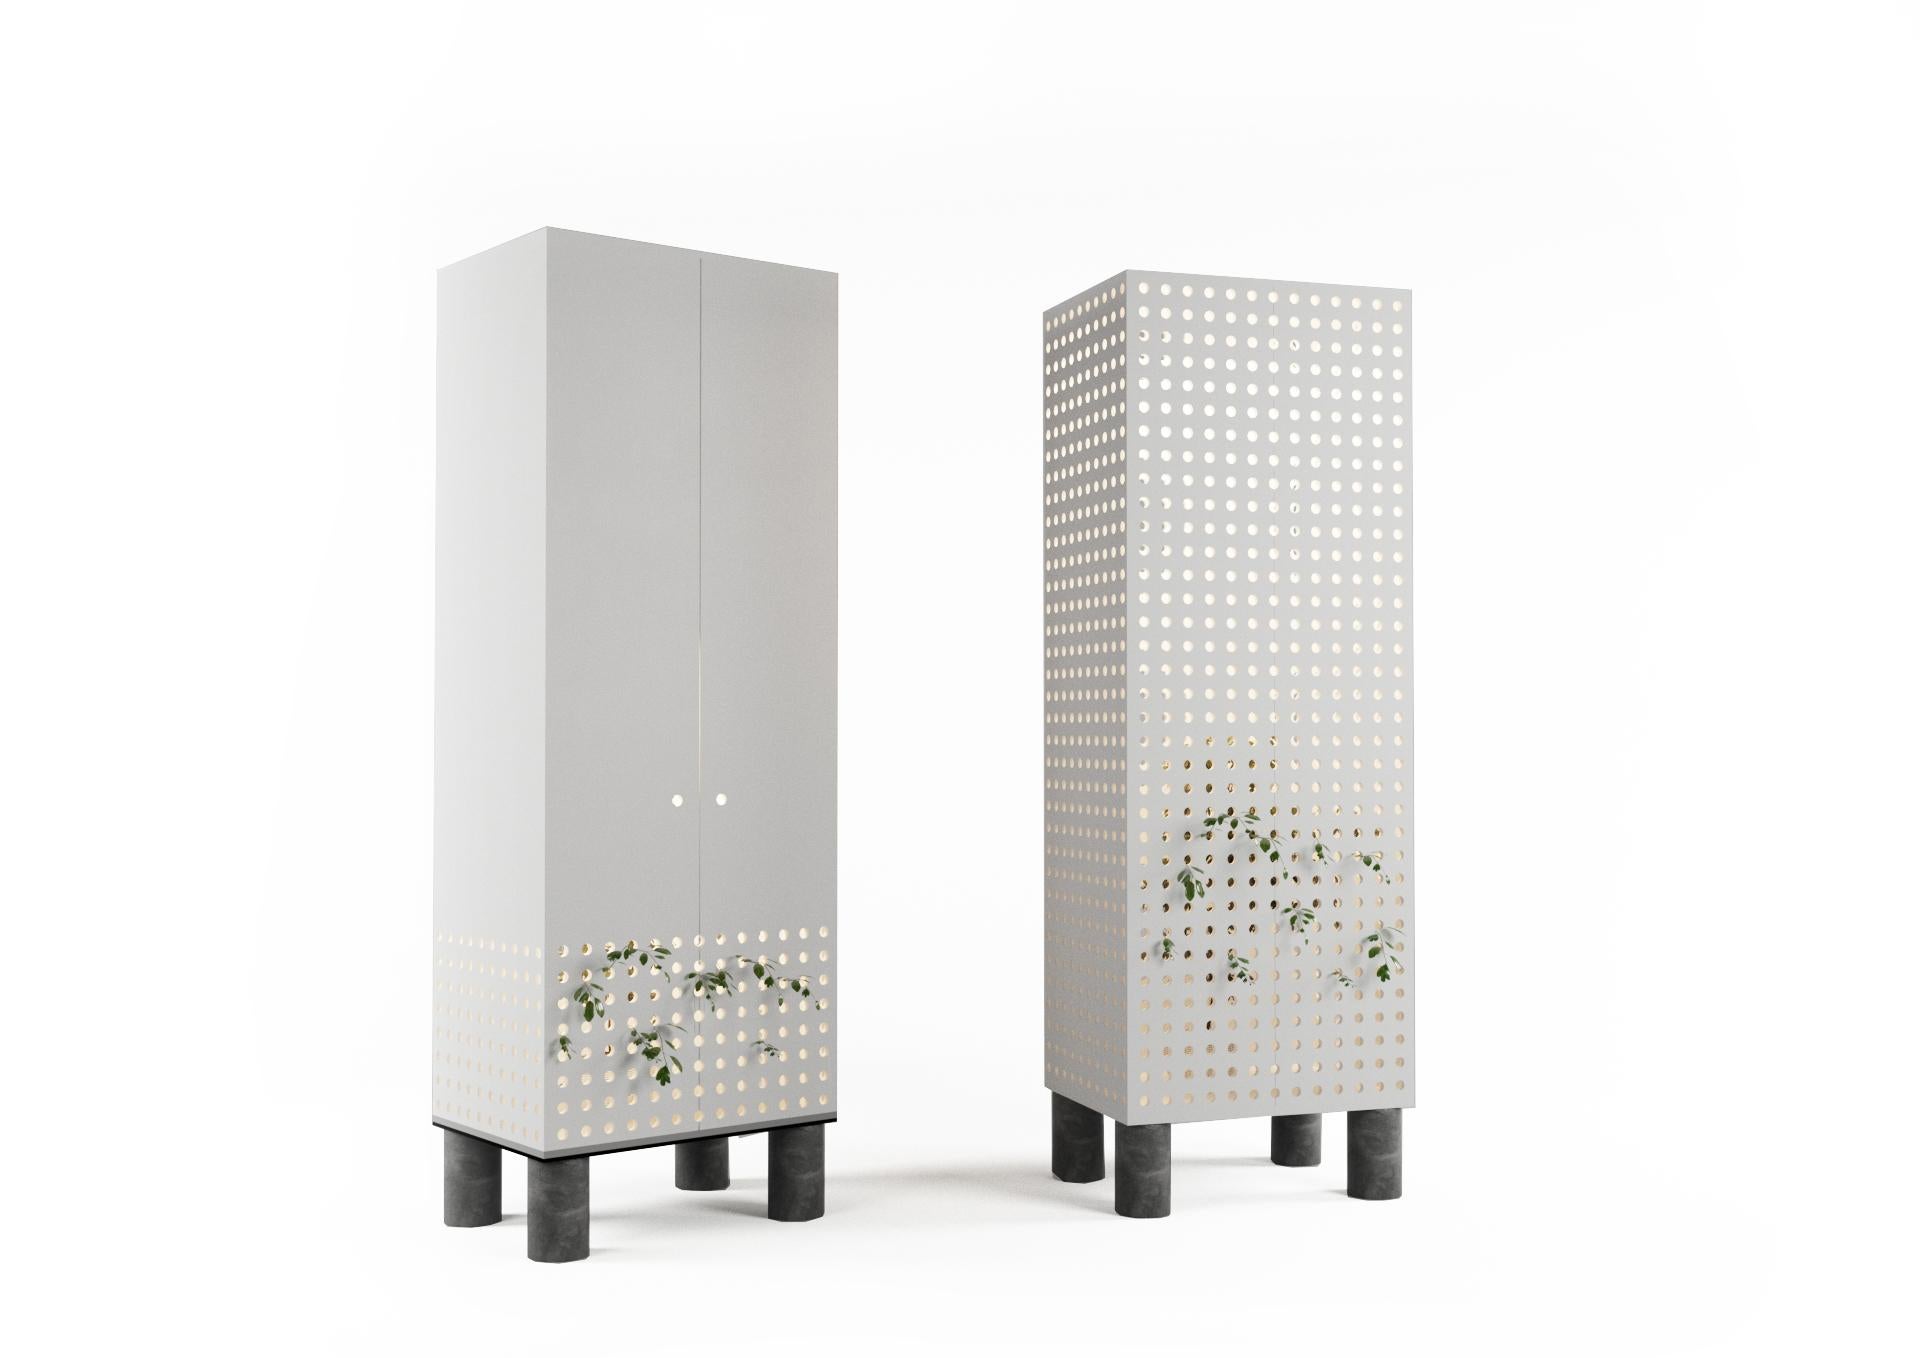 The white cupboard as if it radiated pure air. The ecologic nature of this perception is supported by the greenery of live plants growing through the perforation of the panels. The perforations perform their main purpose of ventilation and serve as